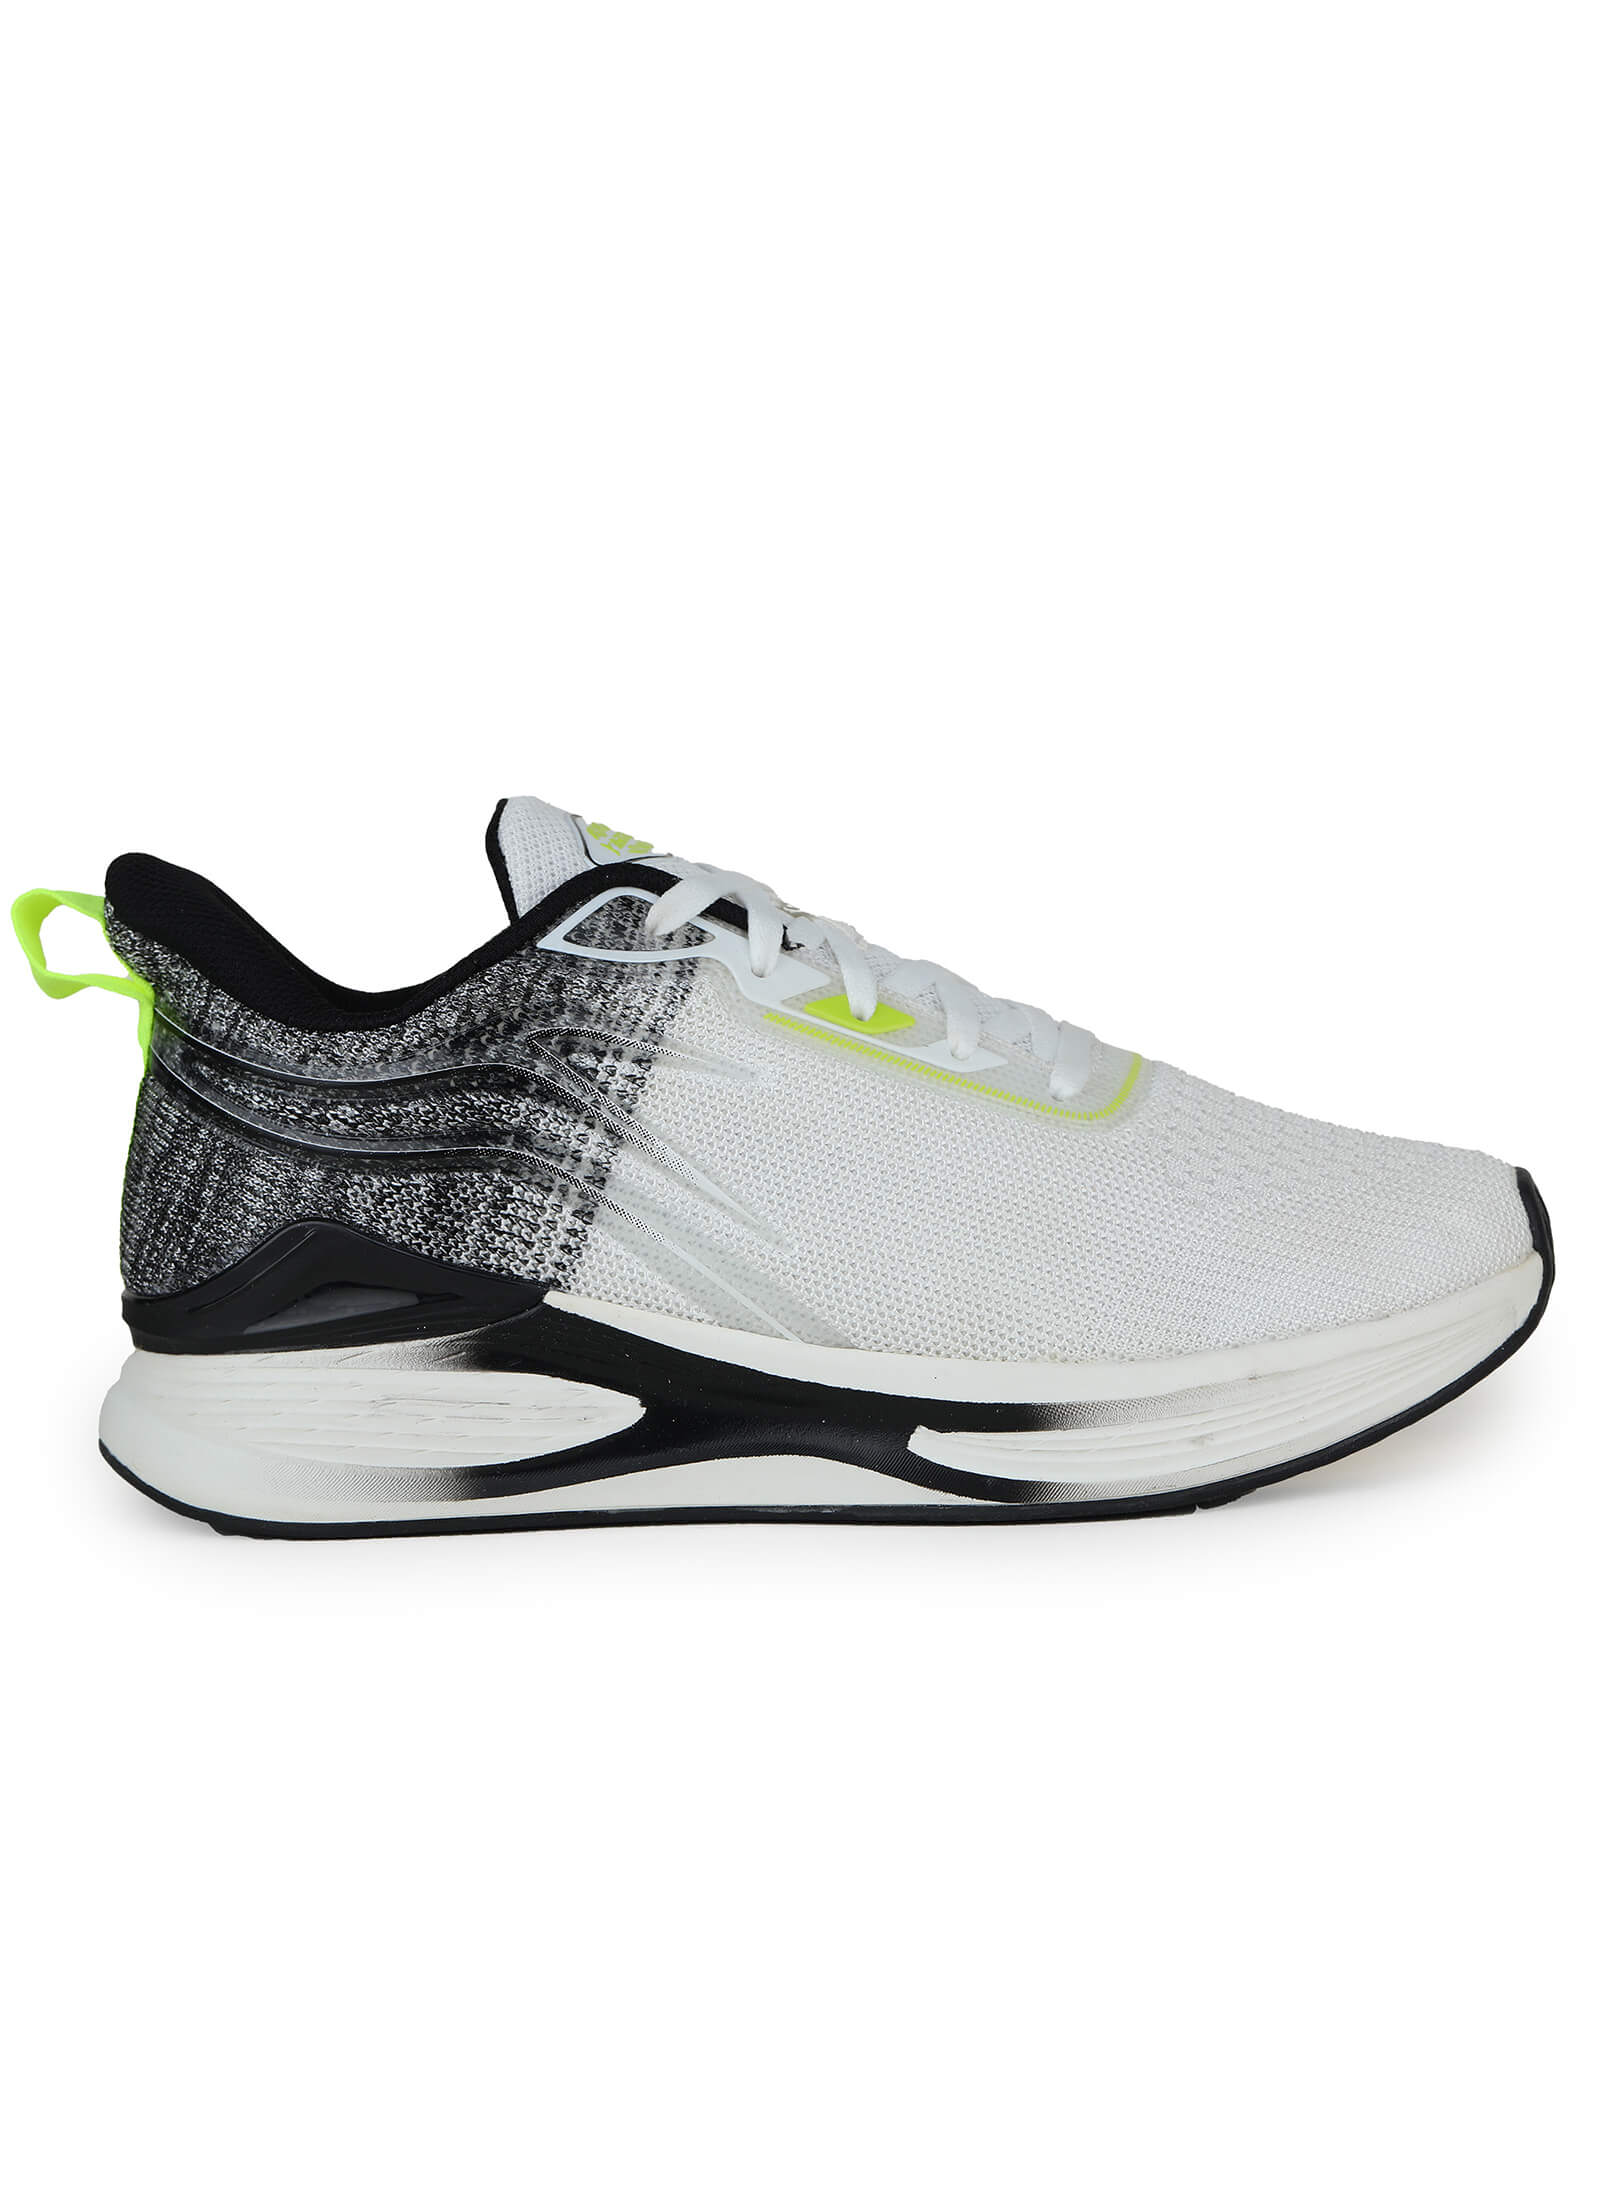 Dynamic Sports Shoes For Men